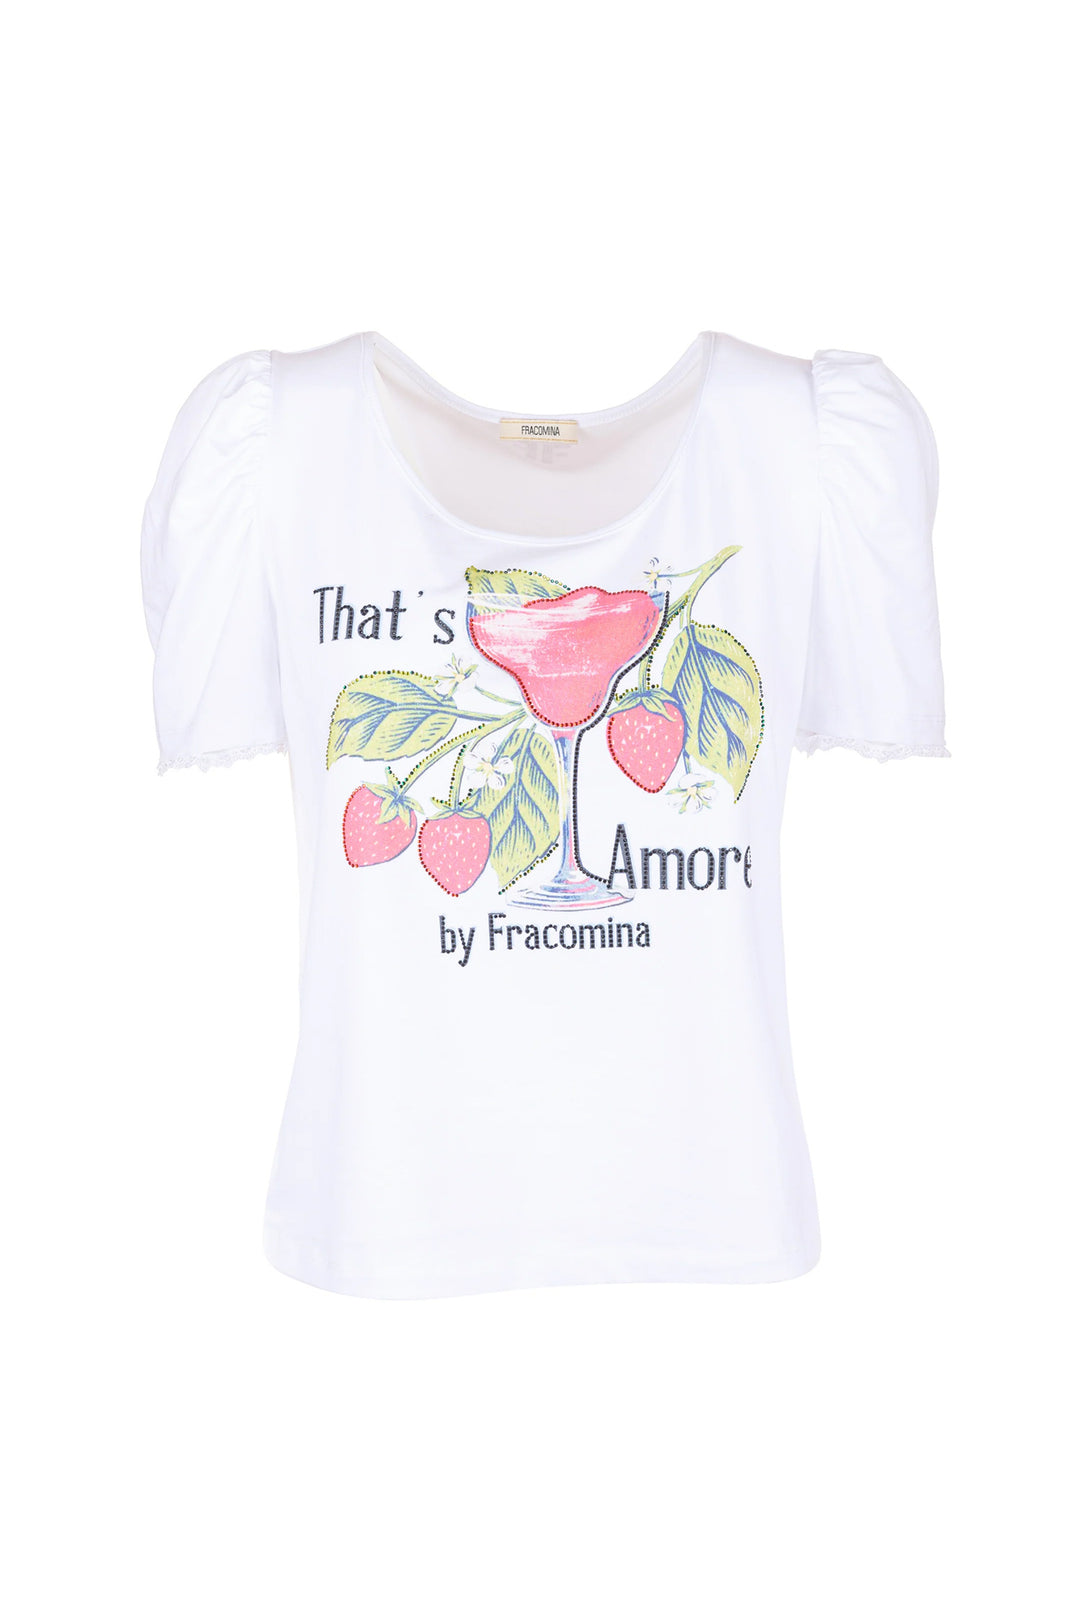 FRACOMINA T-shirt regular bianca in jersey stretch con stampa that's amore - Mancinelli 1954